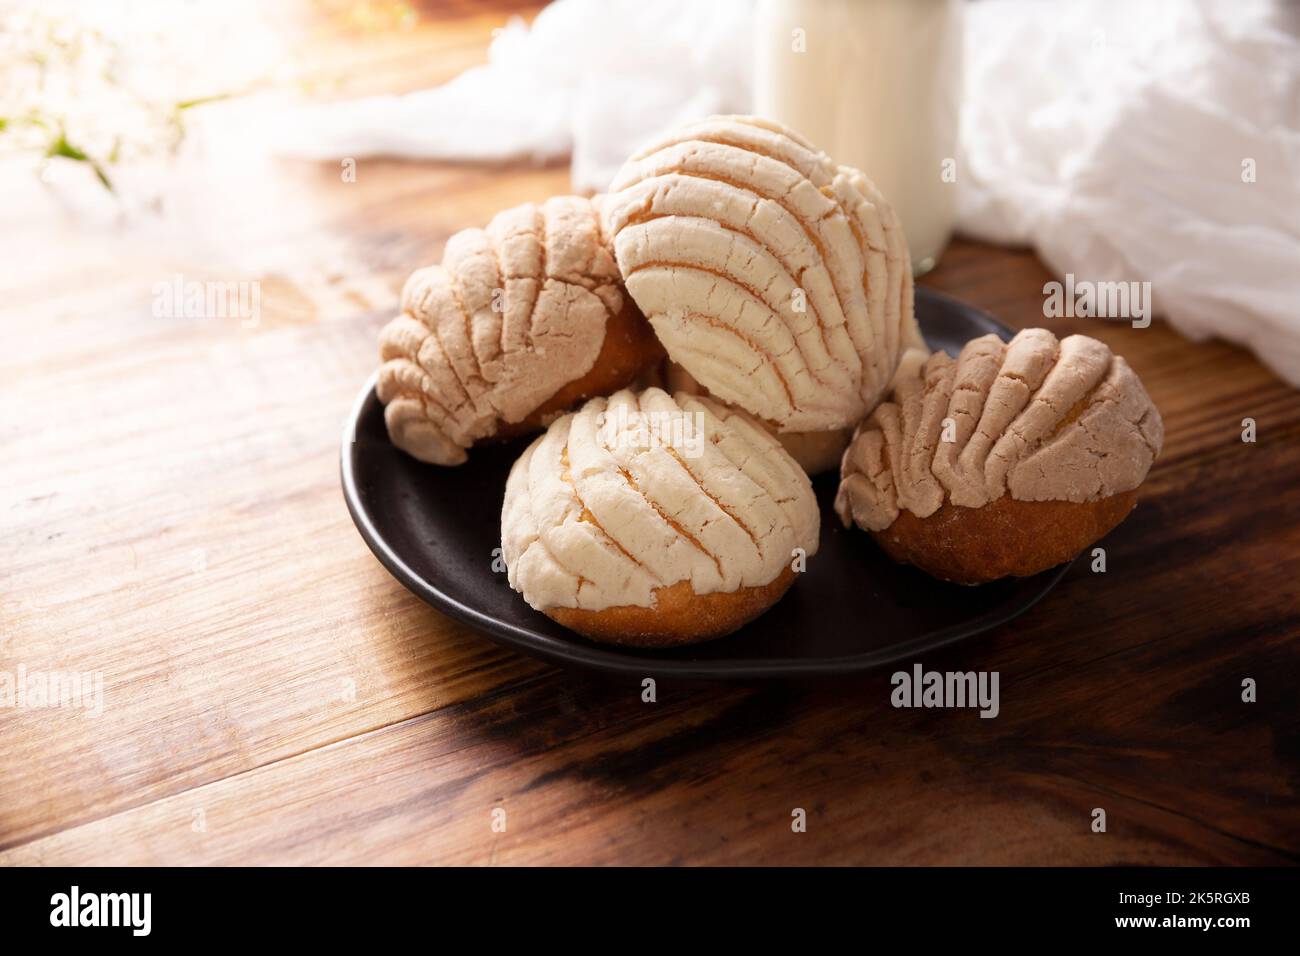 https://c8.alamy.com/comp/2K5RGXB/conchas-mexican-sweet-bread-roll-with-seashell-like-appearance-usually-eaten-with-coffee-or-hot-chocolate-at-breakfast-or-as-an-afternoon-snack-2K5RGXB.jpg